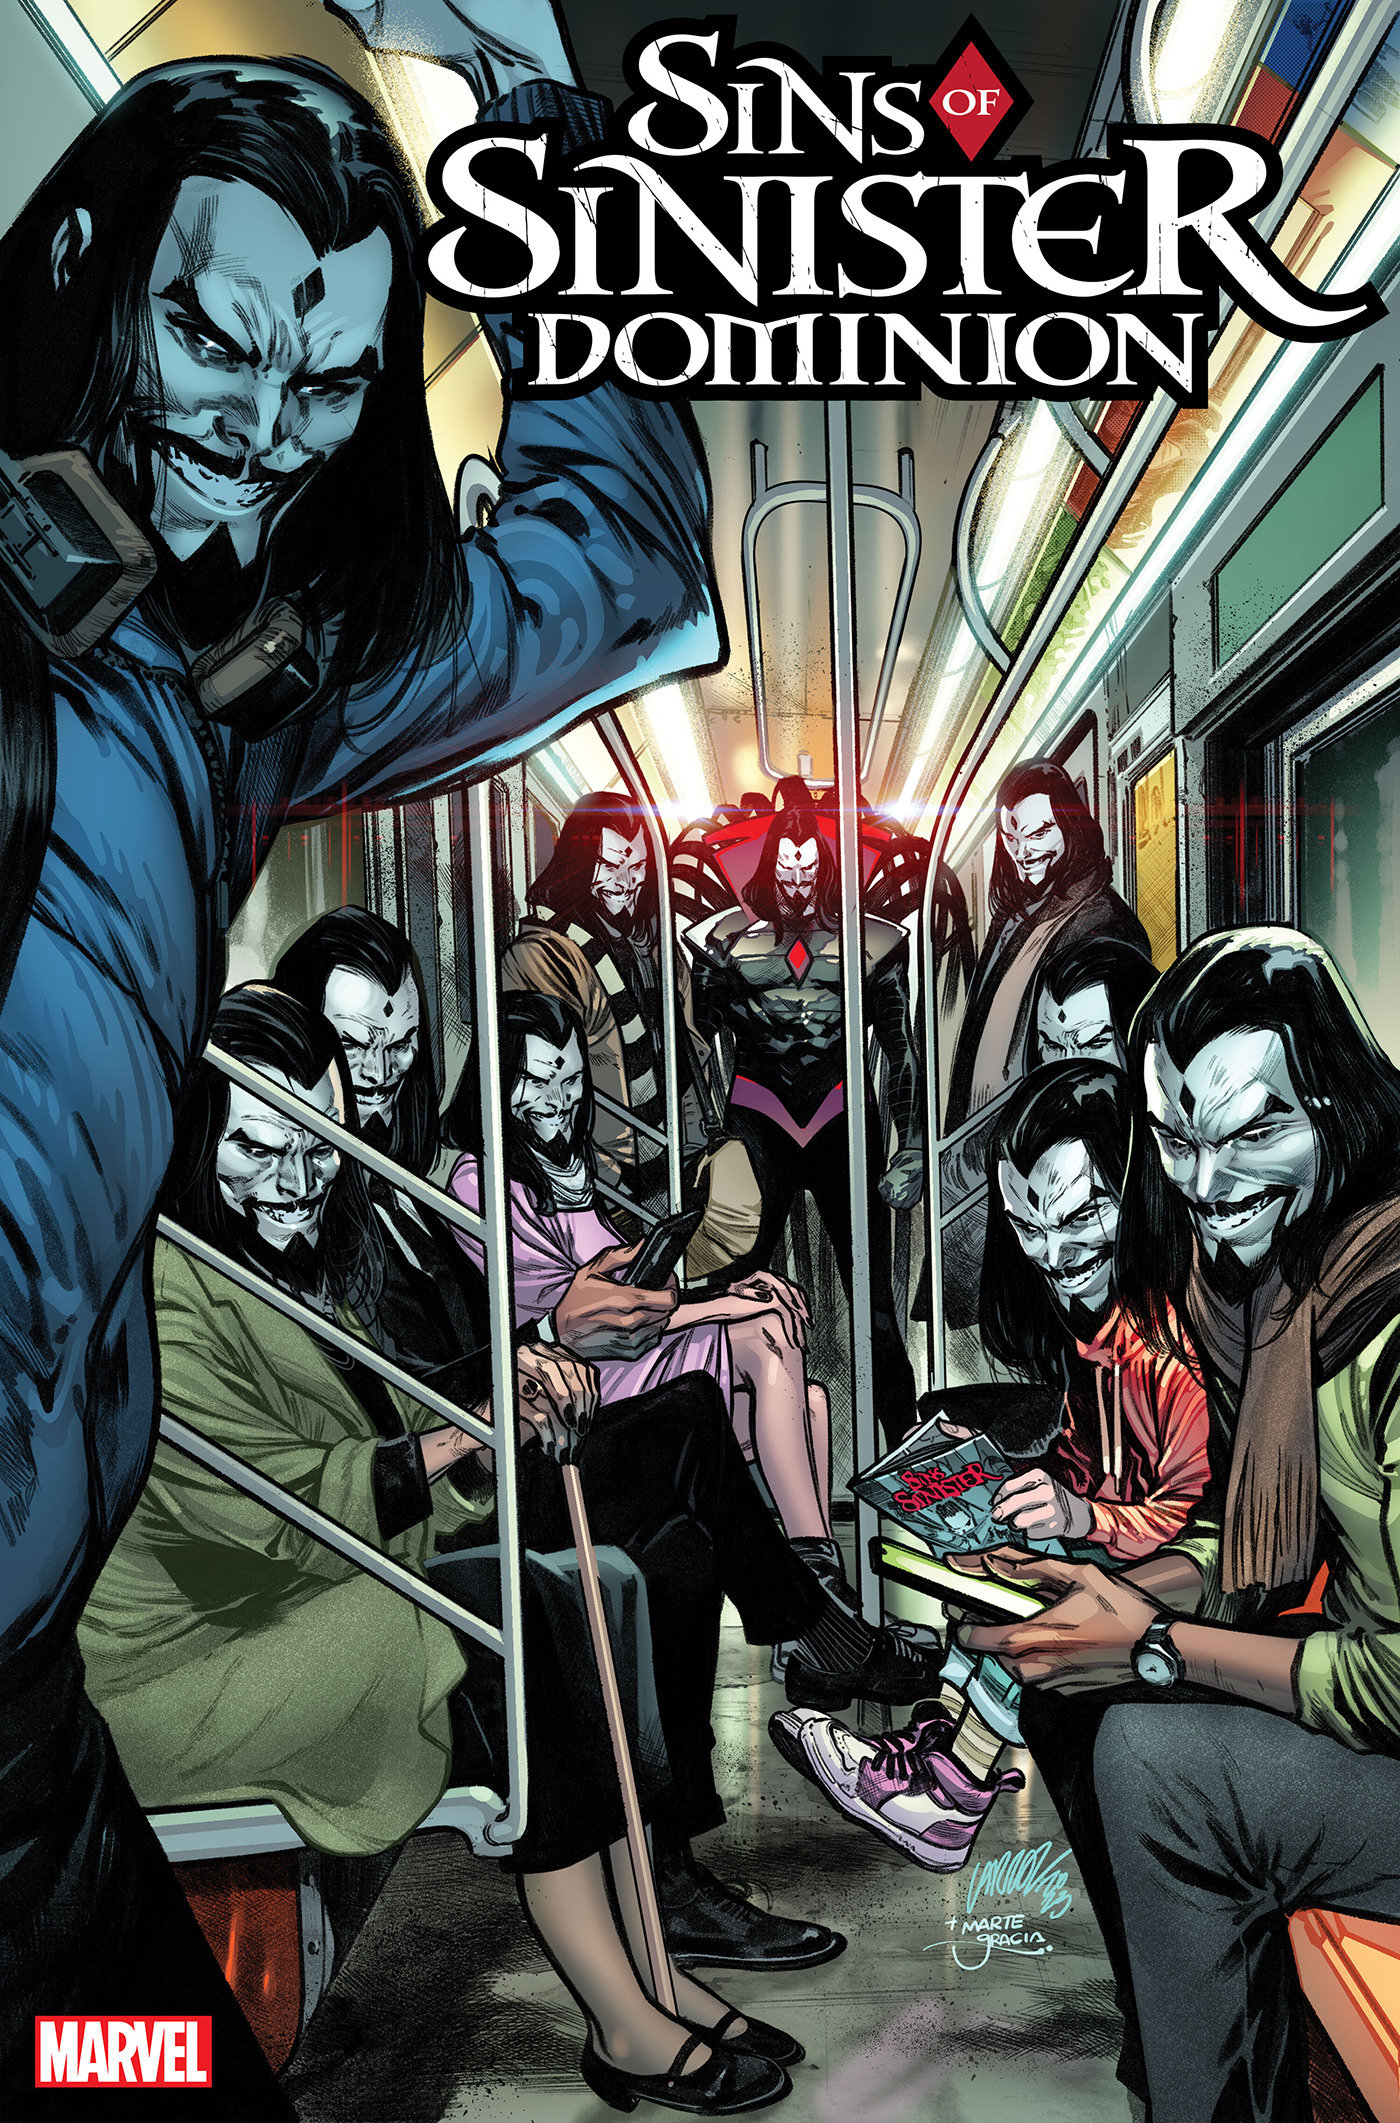 Sins of Sinister Dominion #1 1 for 25 Incentive Larraz